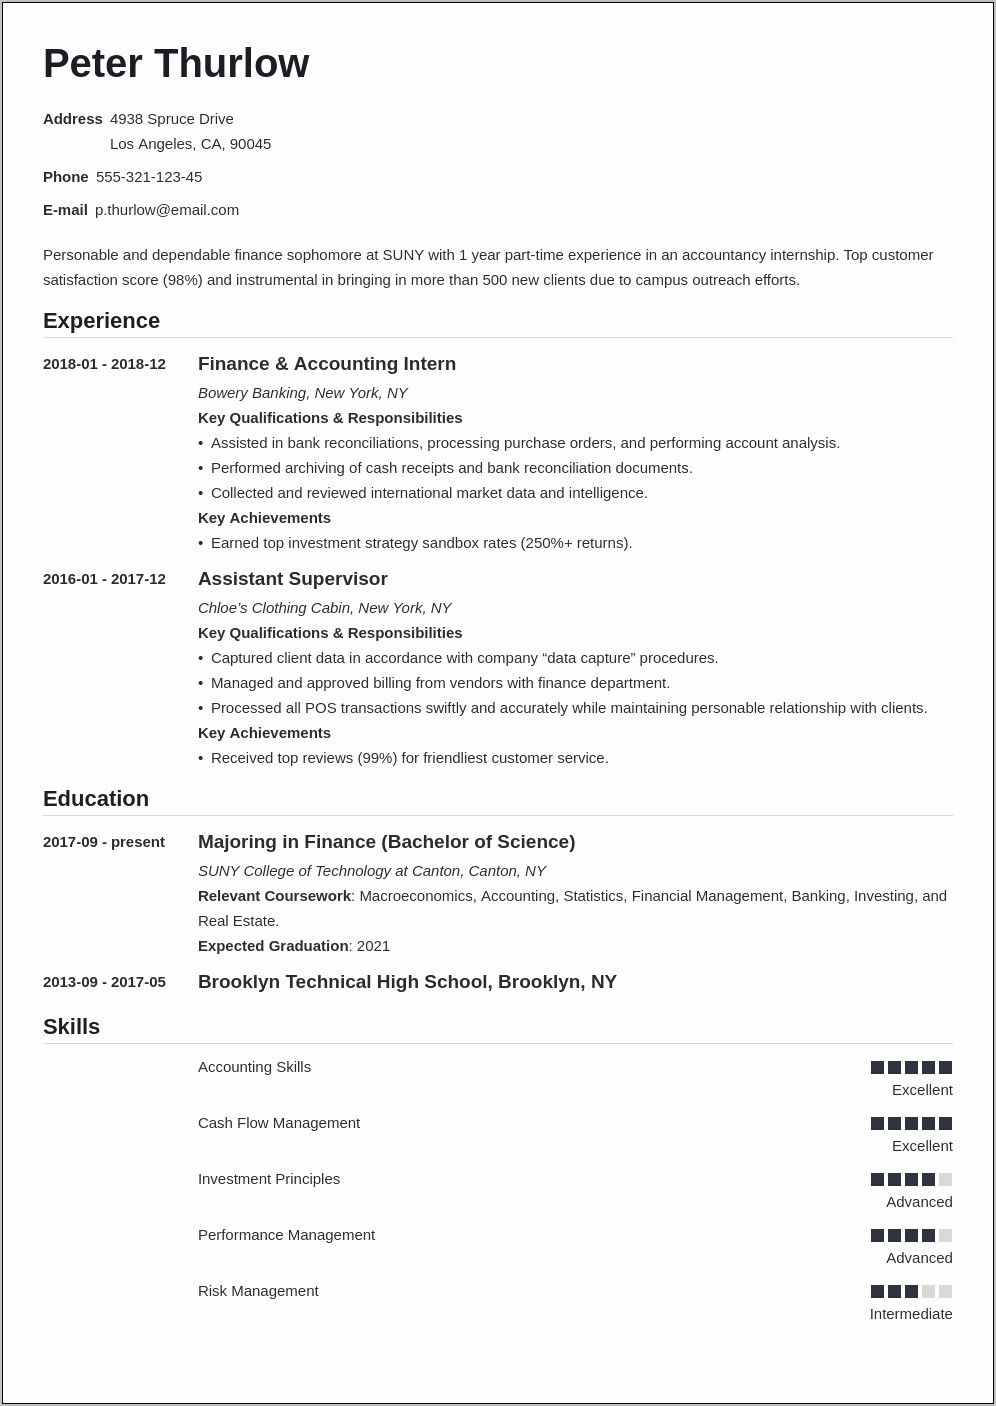 Resume Looking For Intership Objective